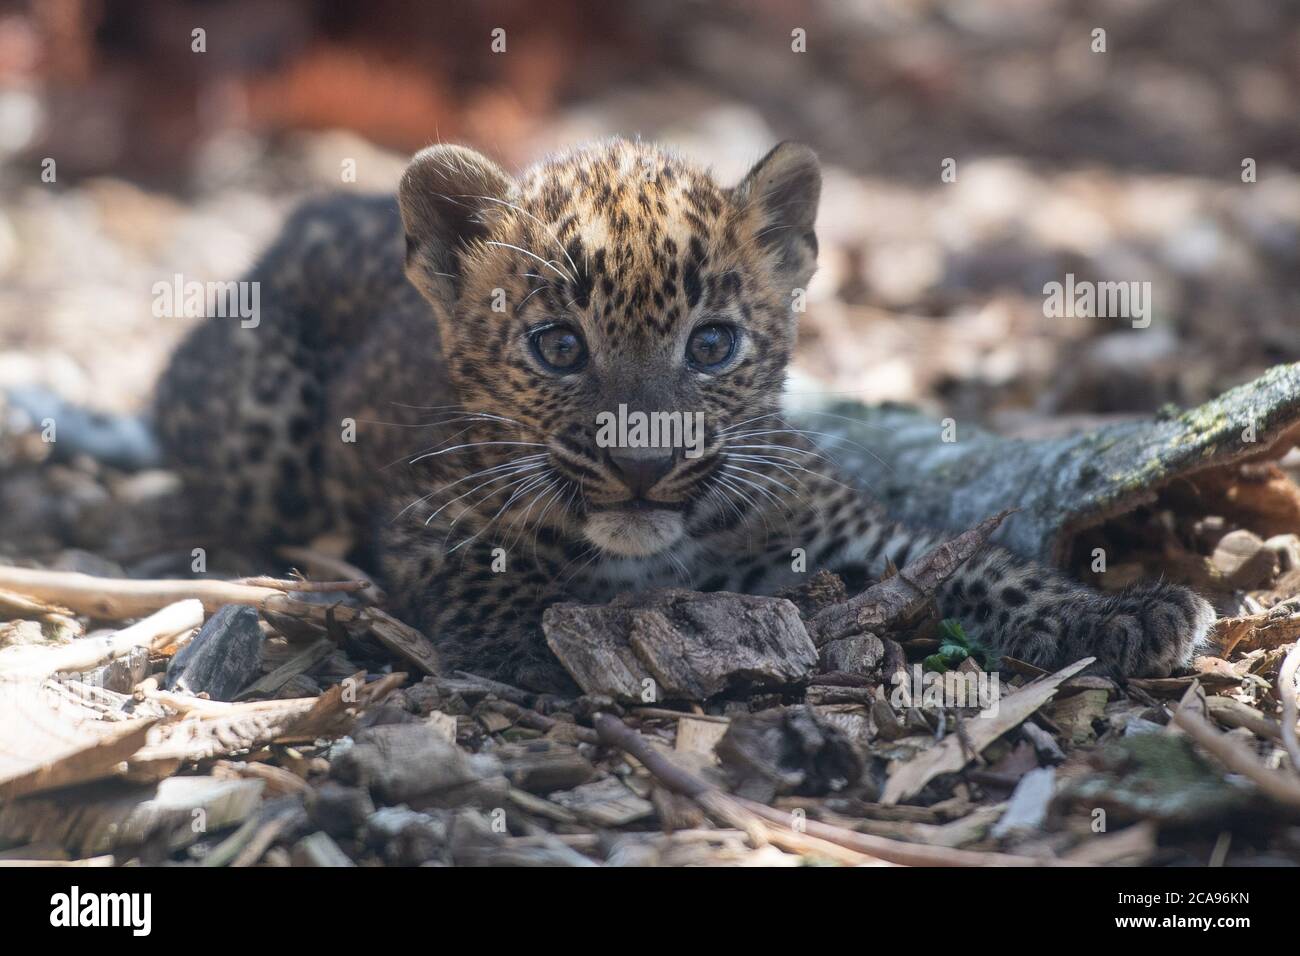 One of the eight-week-old Sri Lankan leopard cubs in their enclosure at Banham Zoo, Norfolk. The pair of male cubs, who are yet to be named, were born on June 4 to mother Sariska and her breeding partner Mias. Stock Photo